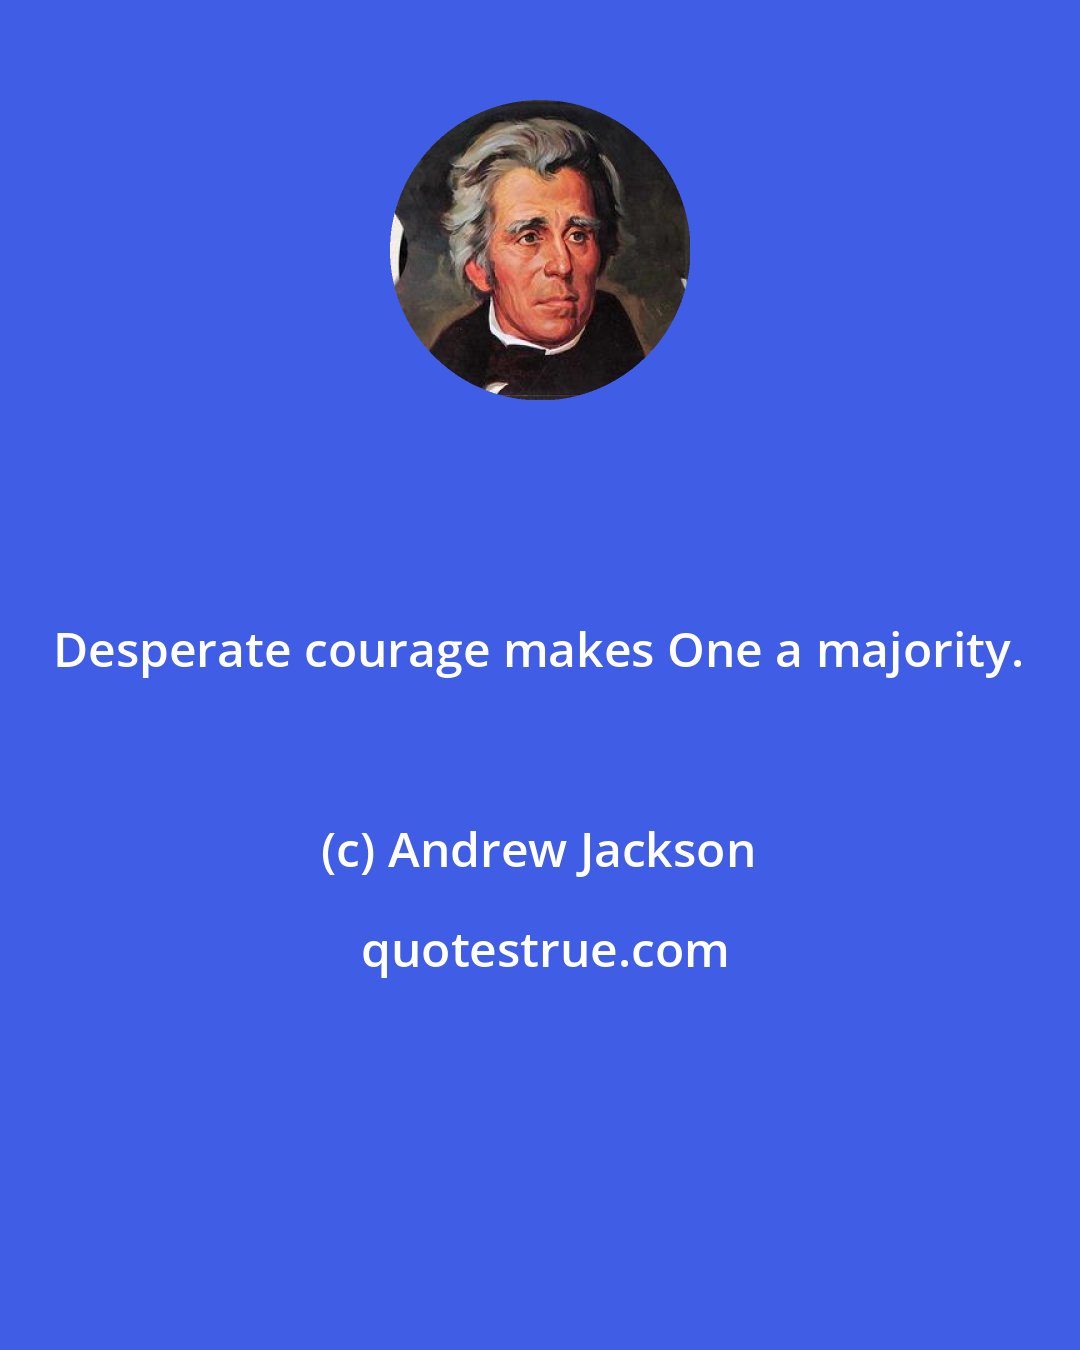 Andrew Jackson: Desperate courage makes One a majority.